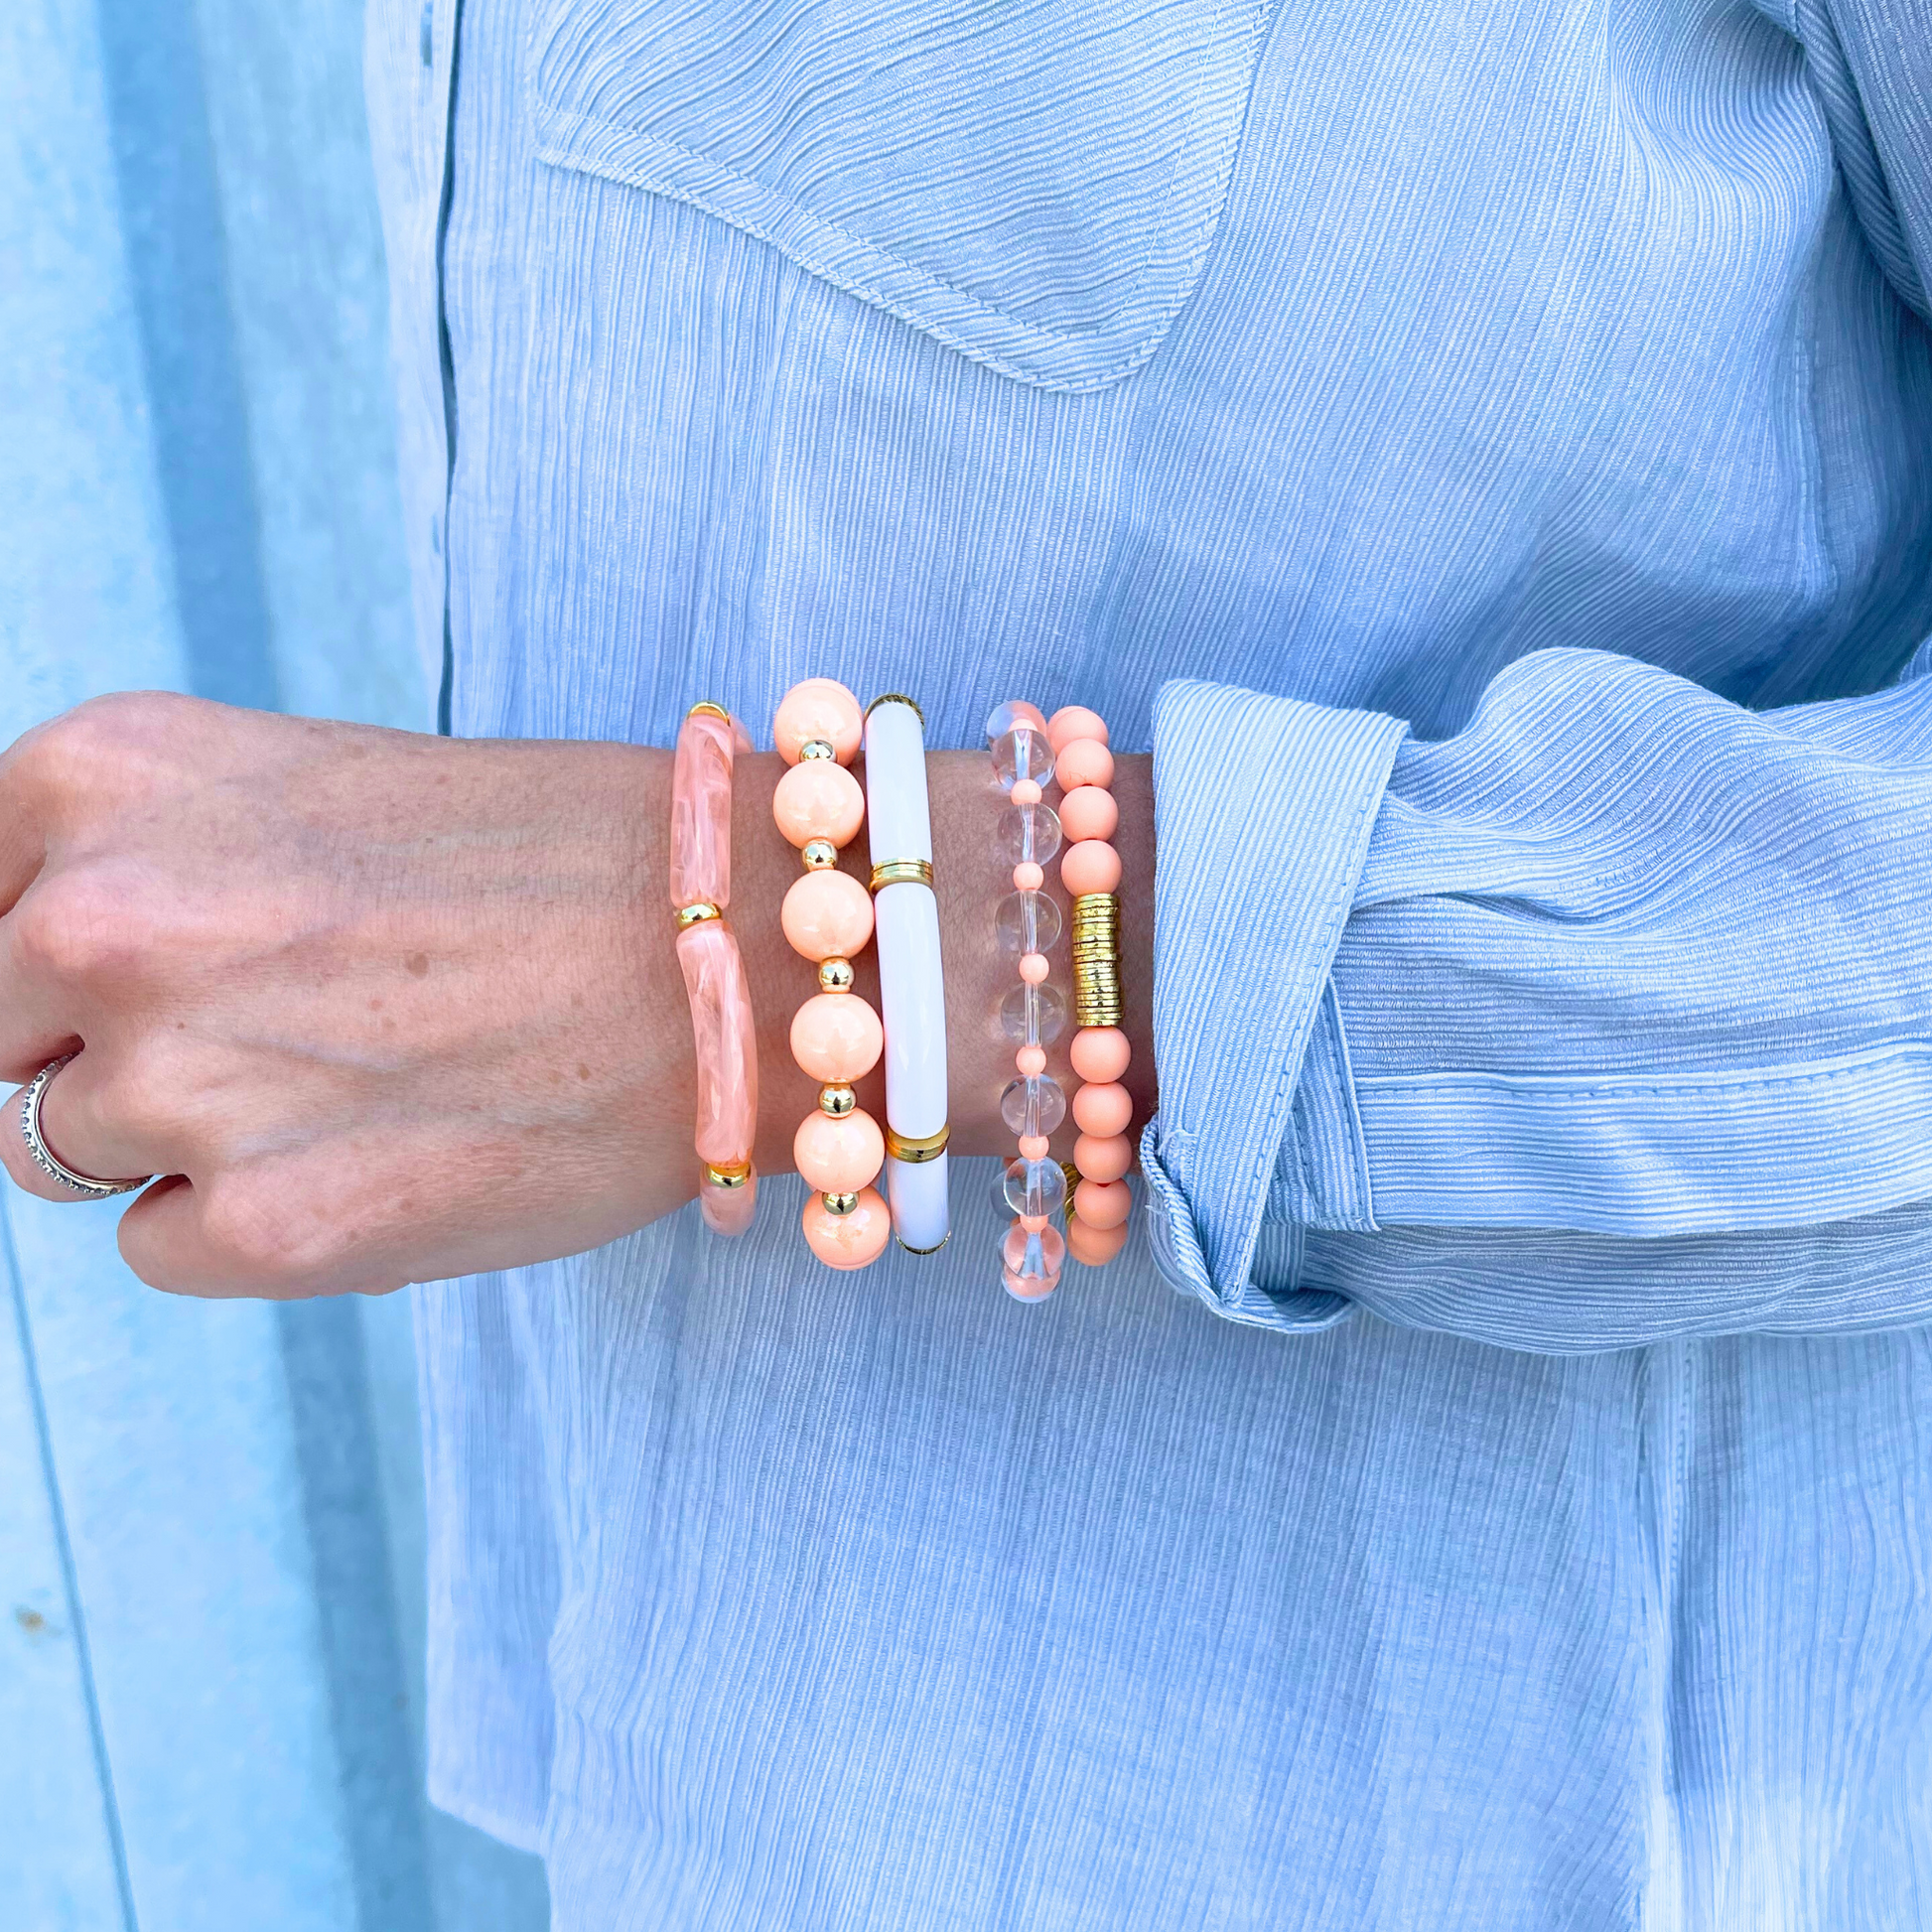 Model wearing 5-peice peach golden hour bracelet stack. This bracelet stack has two 8mm skinny bamboo acrylic tube bangles; peach marble and white. Clear 6mm quartz round beads with alternating 4mm peach acrylic beads. 12mm chunky acrylic round beads with alternating gold filled round beads. And also designed with 6mm peach acrylic round beads with gold plated flats.